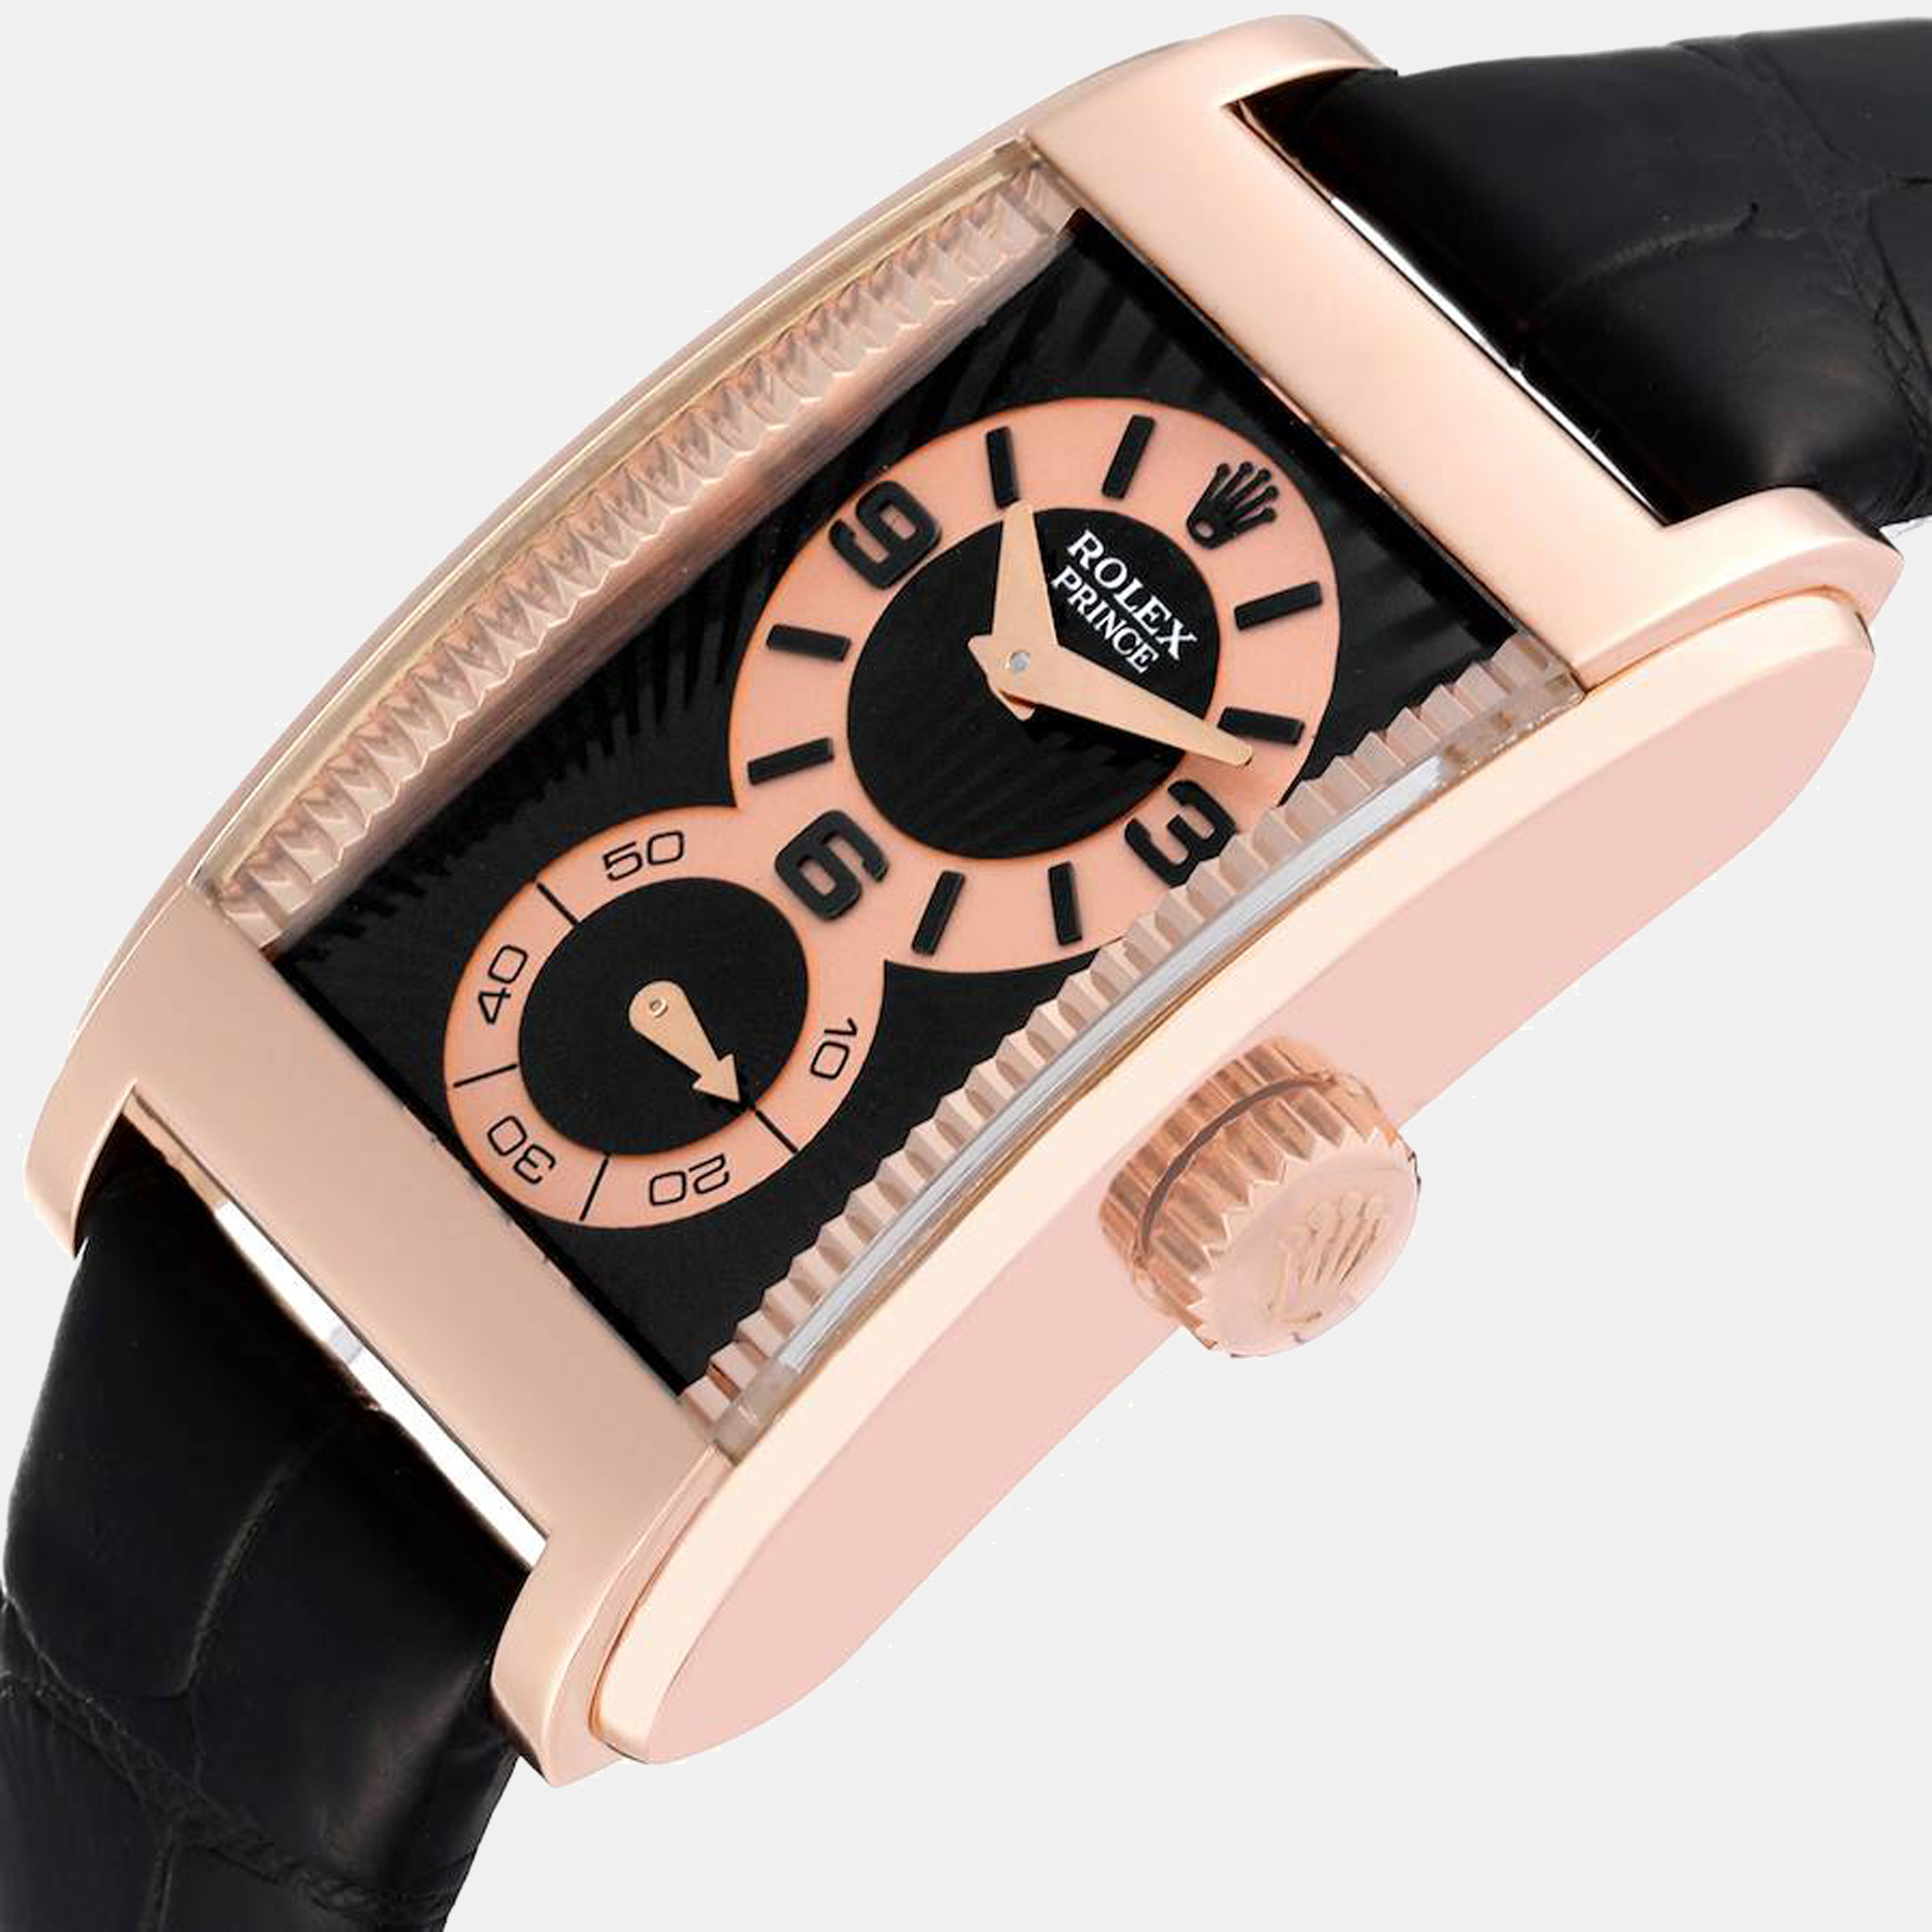 

Rolex Cellini Prince Rose Gold Black Dial Leather Strap Men's Watch 28 x 47 mm